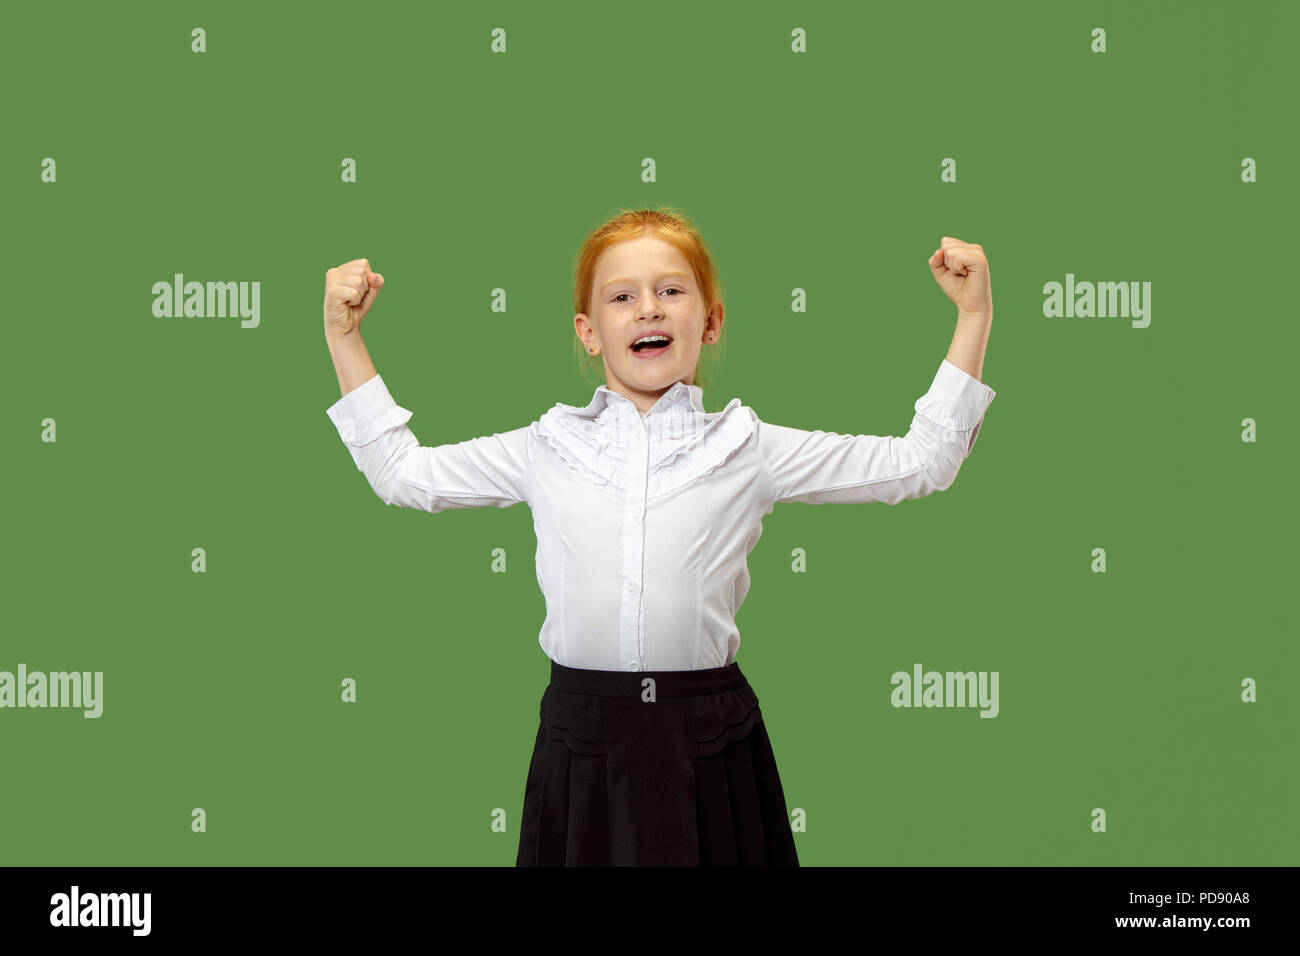 Happy teen girl standing, smiling and pointing to himself isolated on trendy green studio background. Beautiful female half-length portrait. Human emotions, facial expression concept. Stock Photo